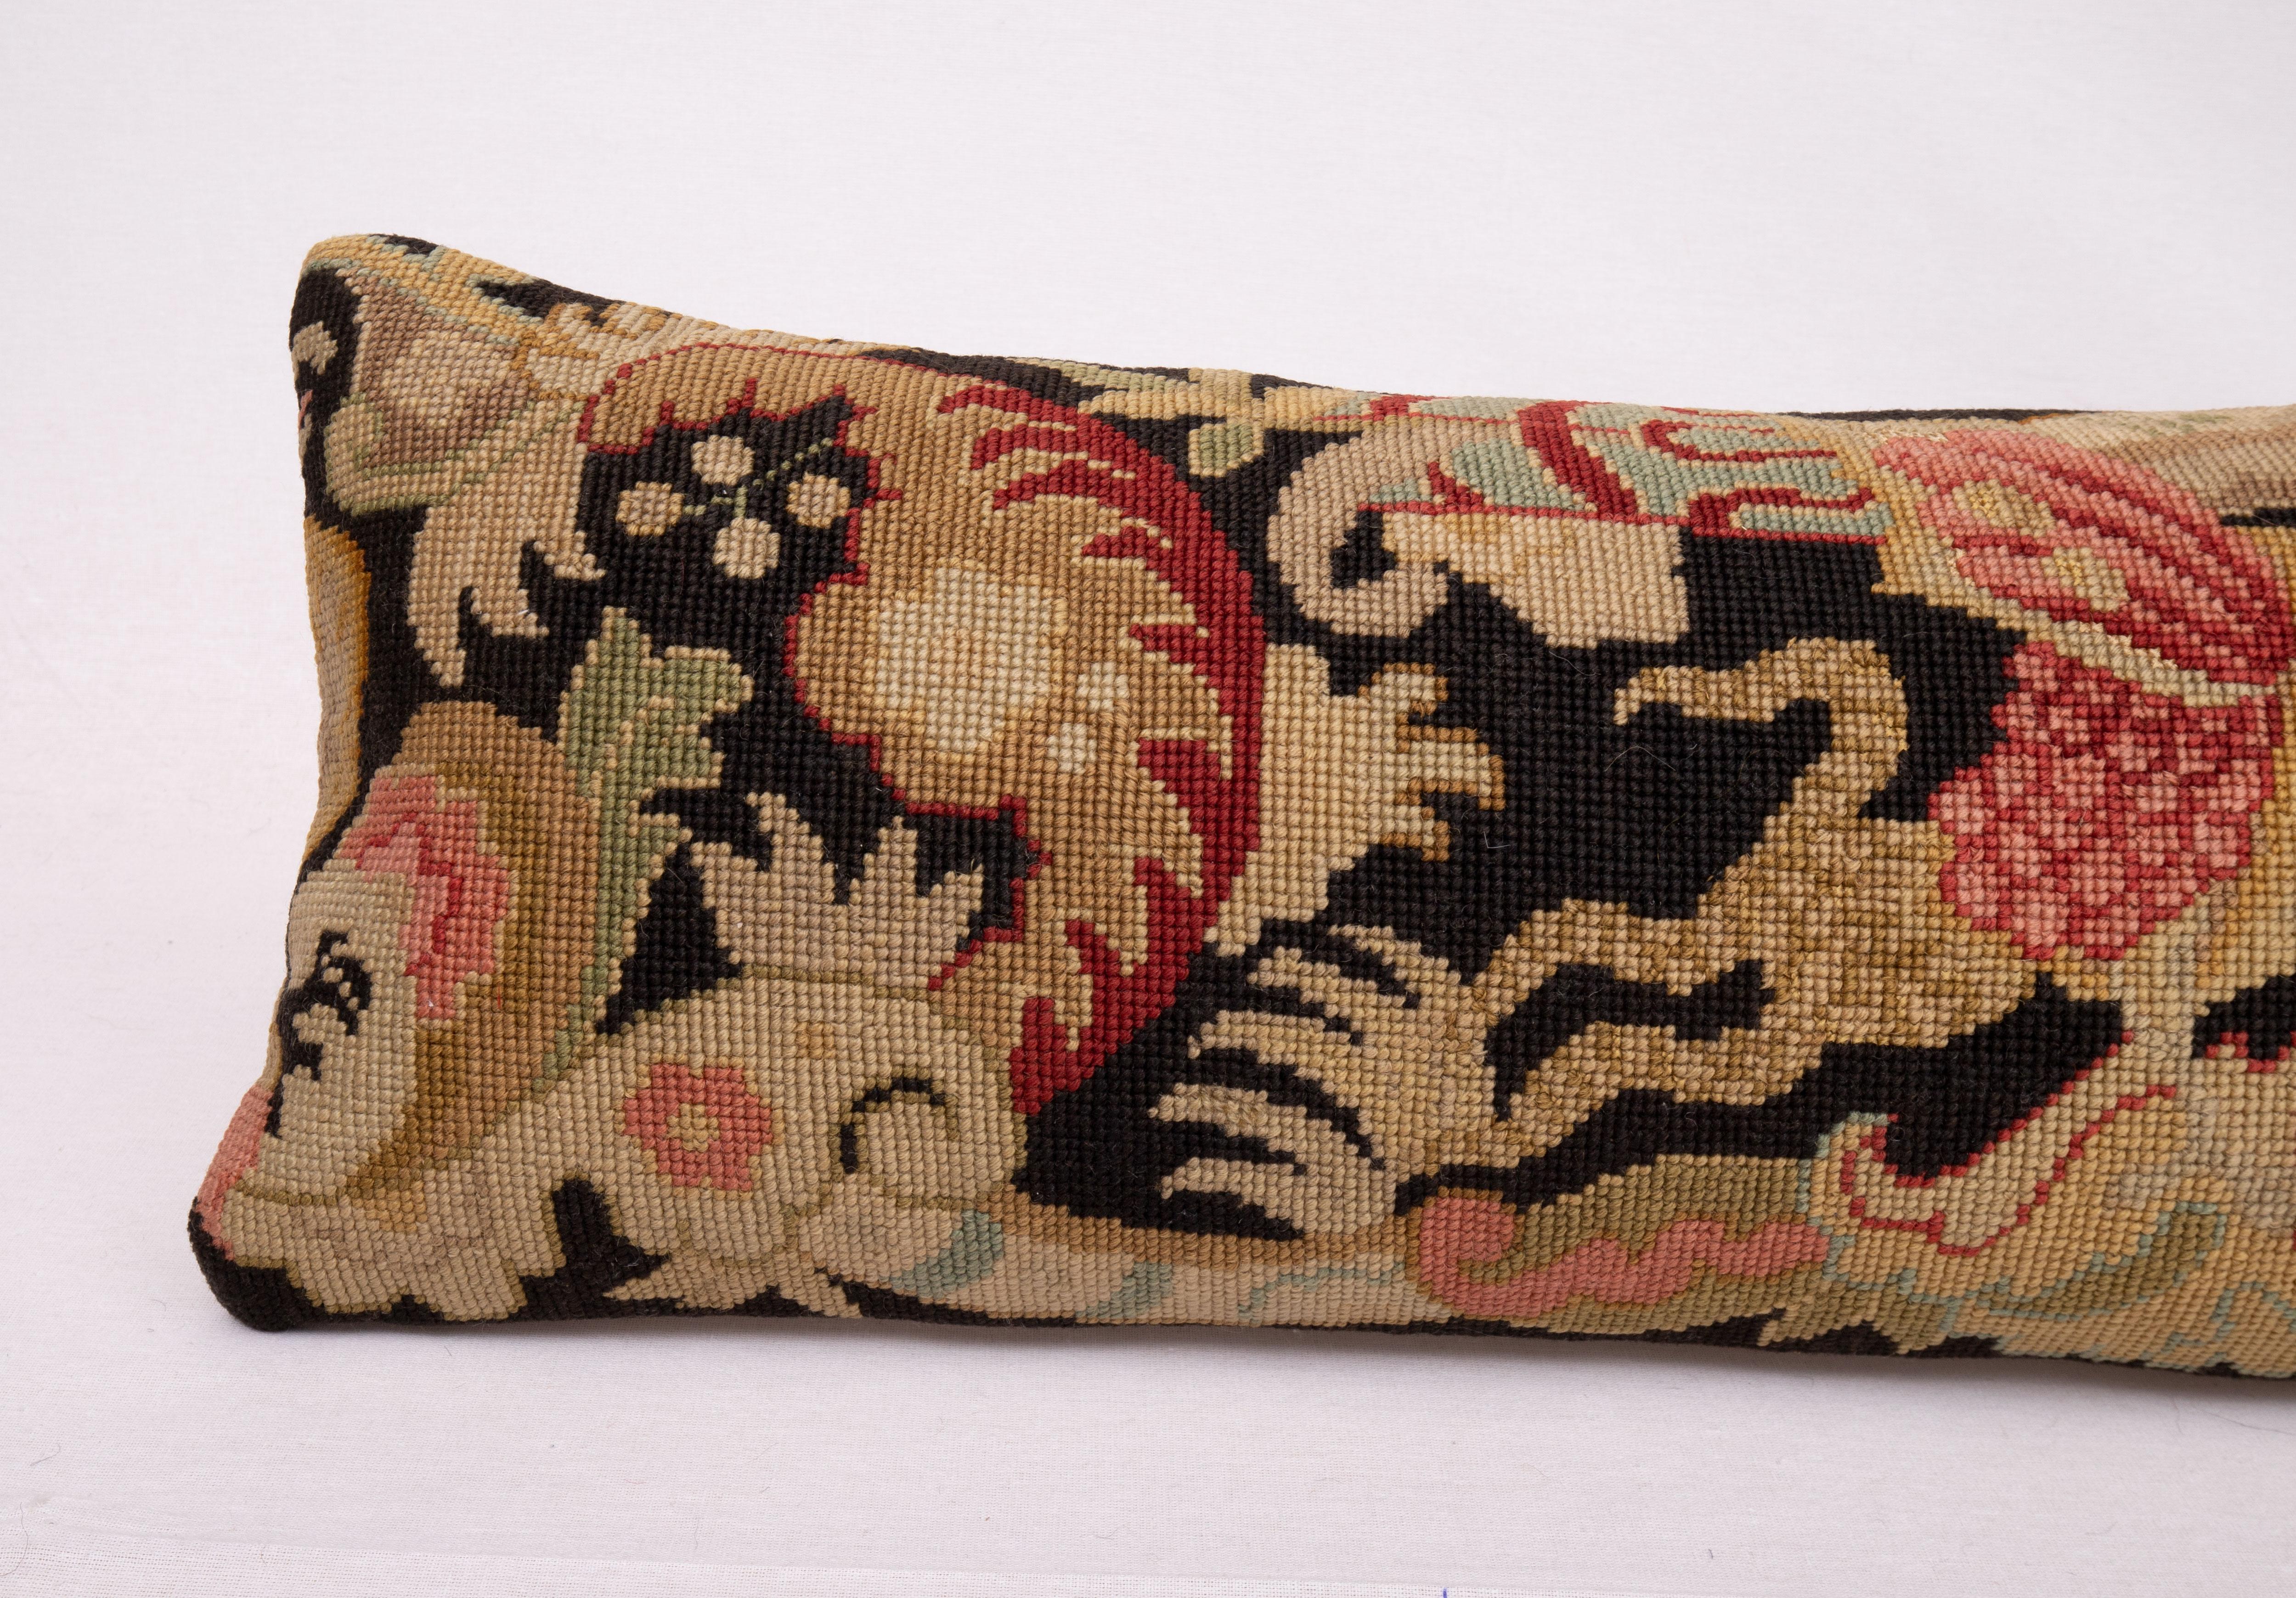 French Lumbar Pillowcase Made from an Antique European Embroidered Panel